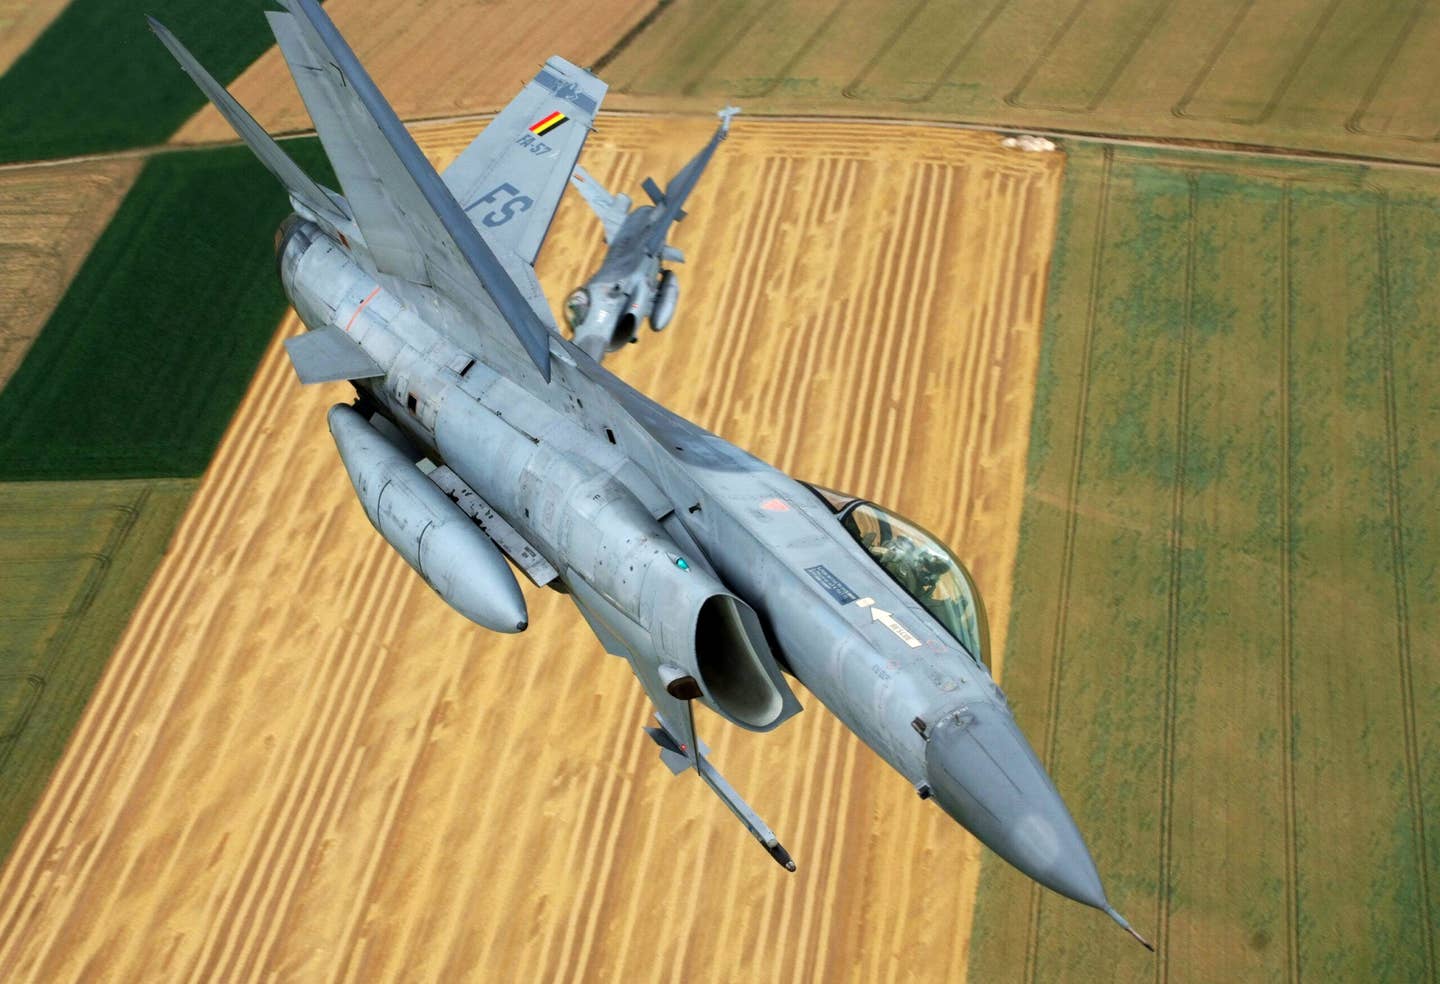 Two Belgian Air Force F-16 fighter jets during a rehearsal flight for the national parade in Florennes, on July 16, 2010. <em>GERARD GAUDIN/AFP via Getty Images</em>